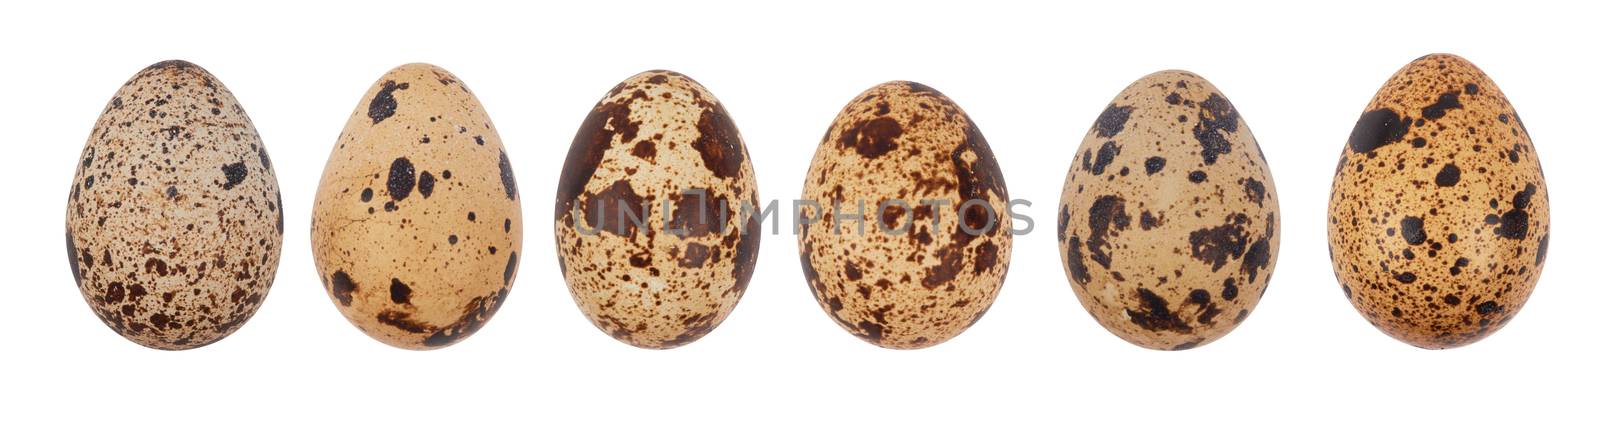 quail eggs isolated on a white background